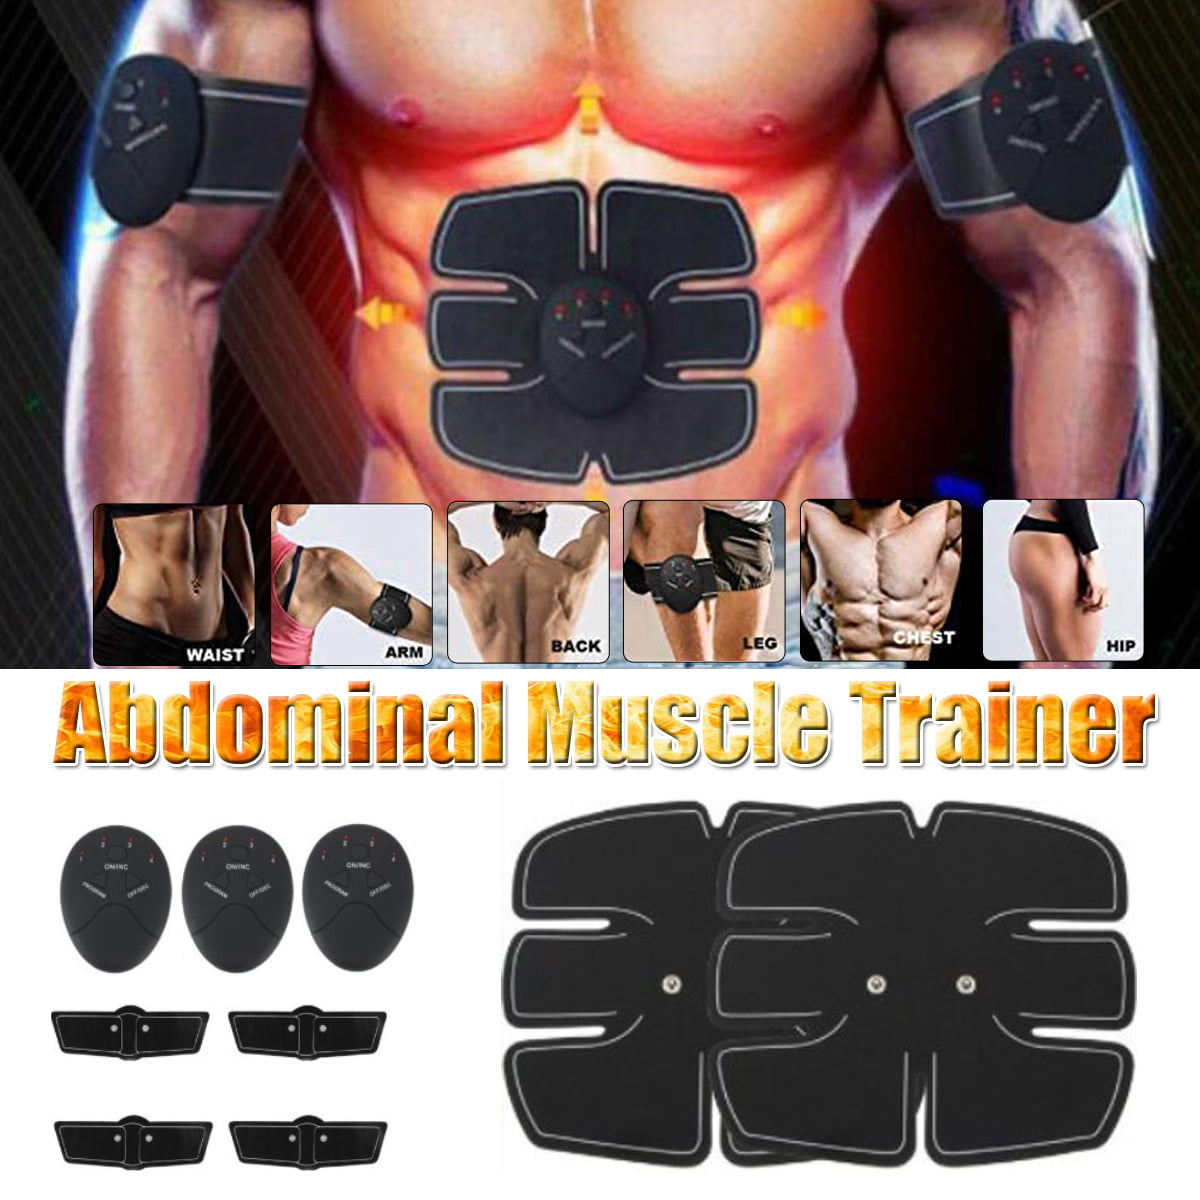 Abdominal Muscle Trainer Rechargable Electric Toning Stimulator SLIMMING Machine 